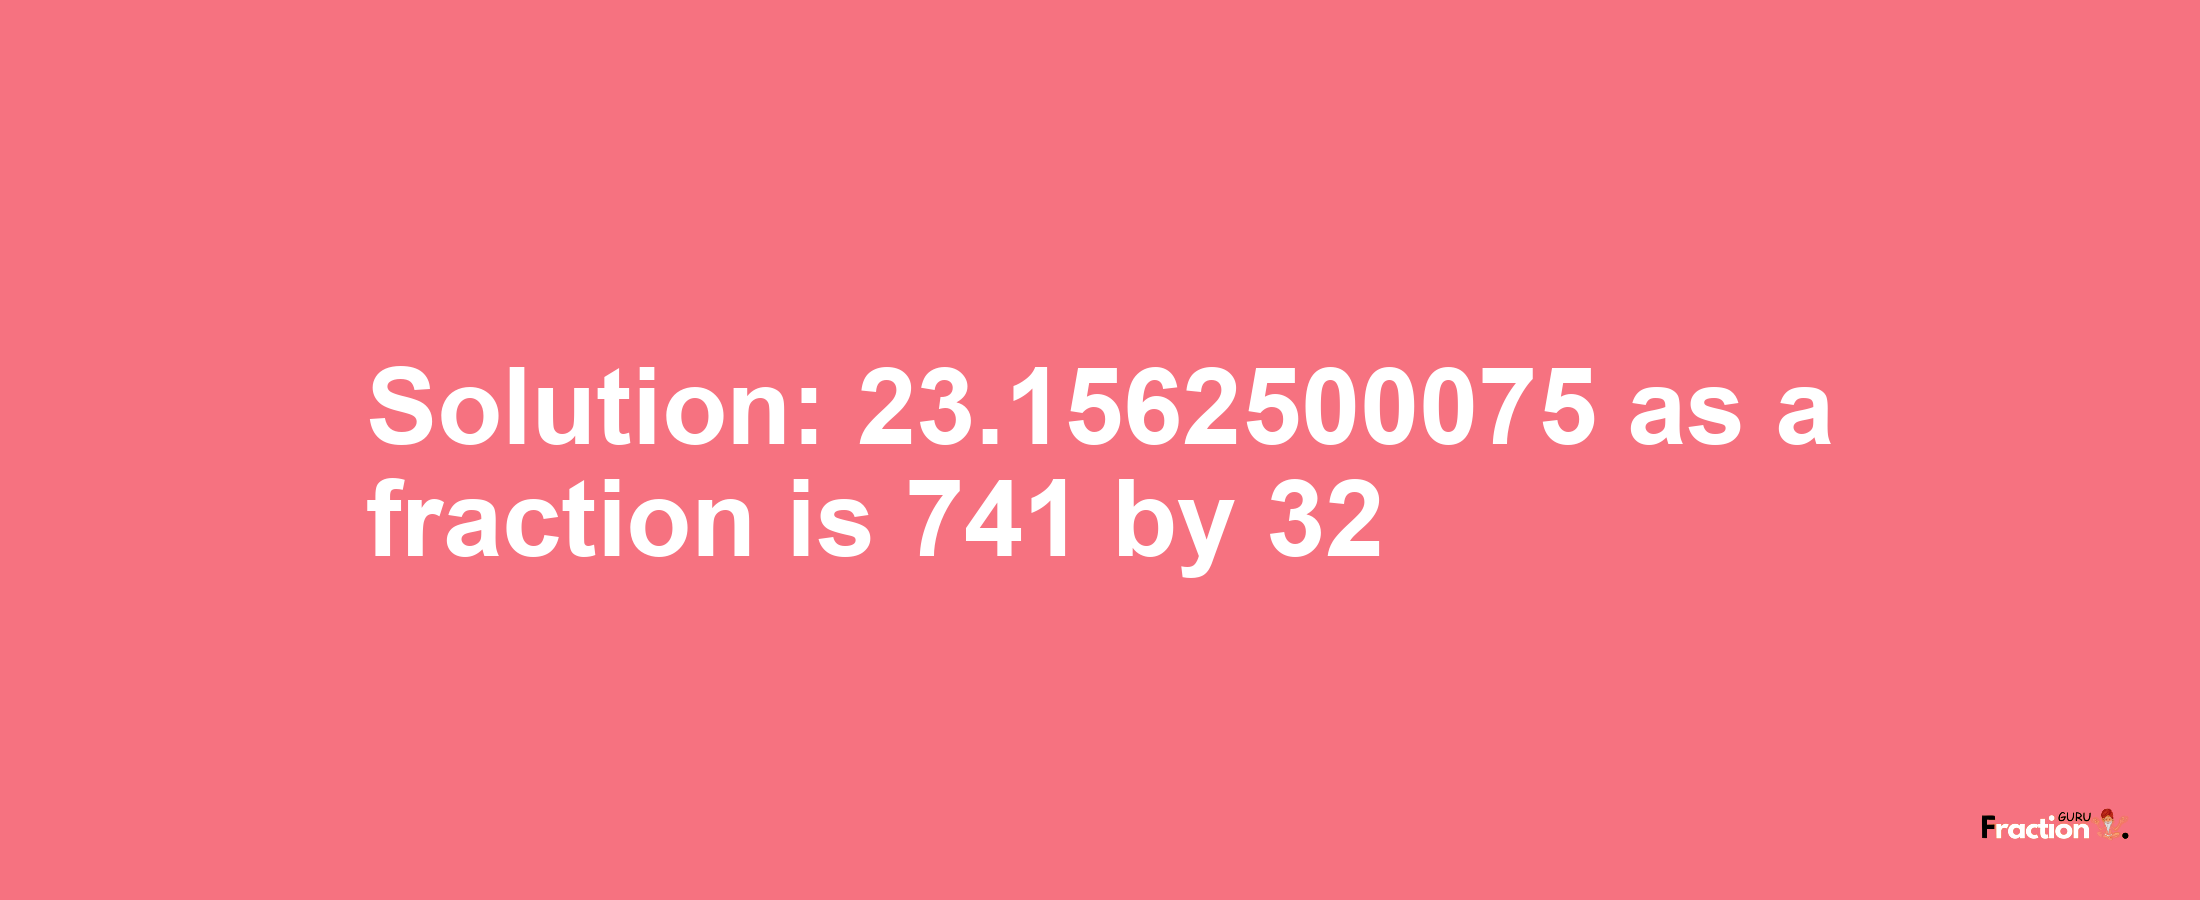 Solution:23.1562500075 as a fraction is 741/32